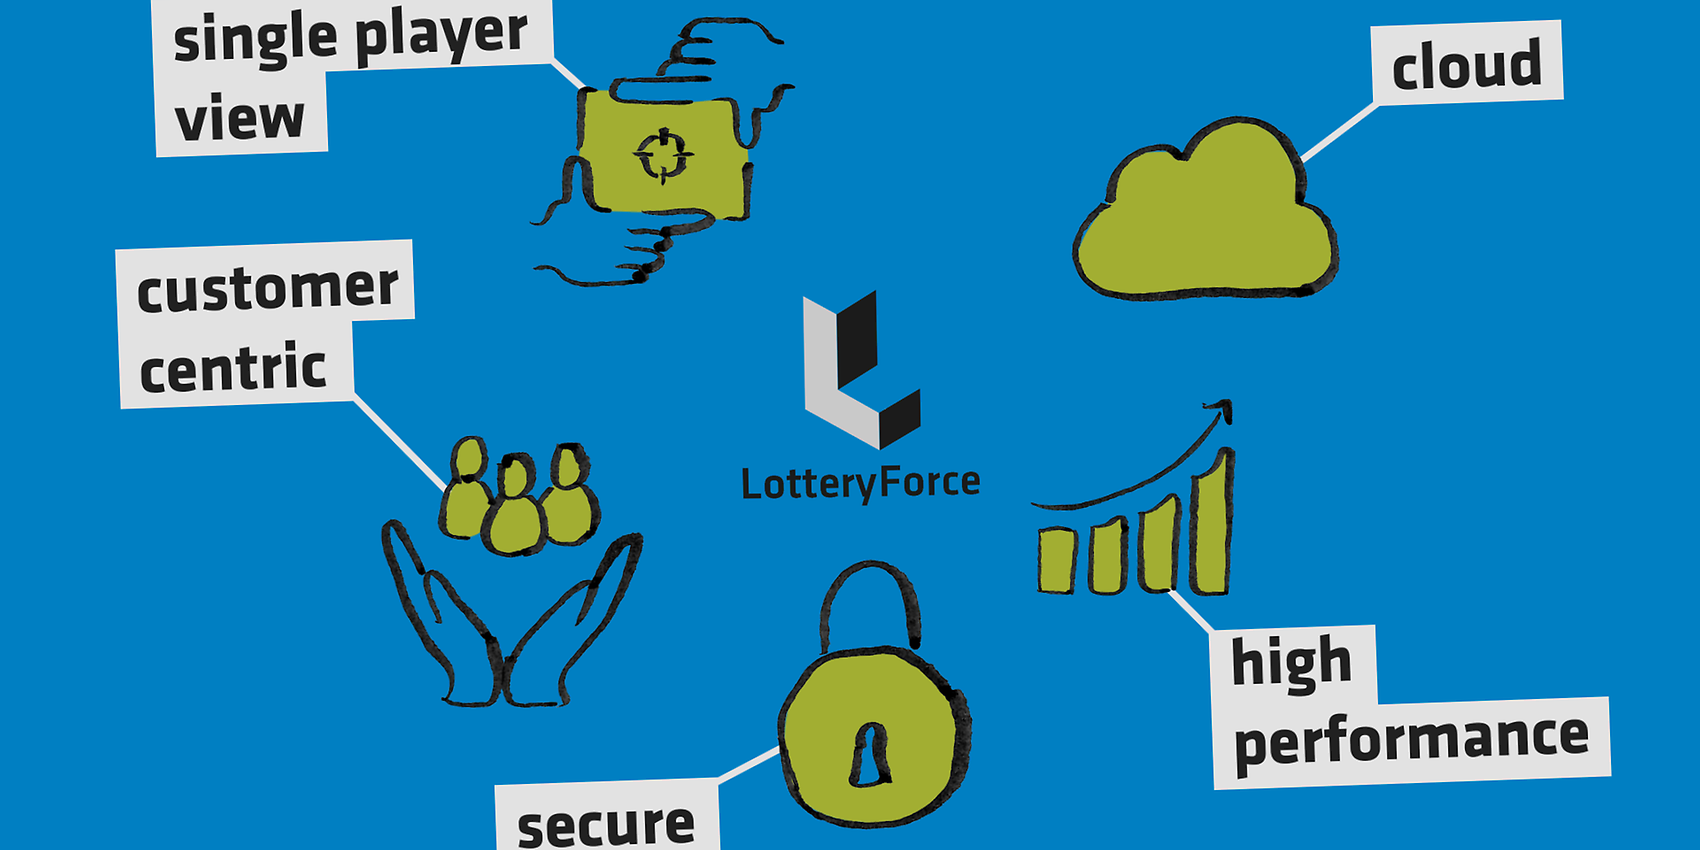 The cloud-ready iGaming platform LotteryForce is built customer-centric and convinces with high performance as well as distinctive security features. (Copyright: adesso)